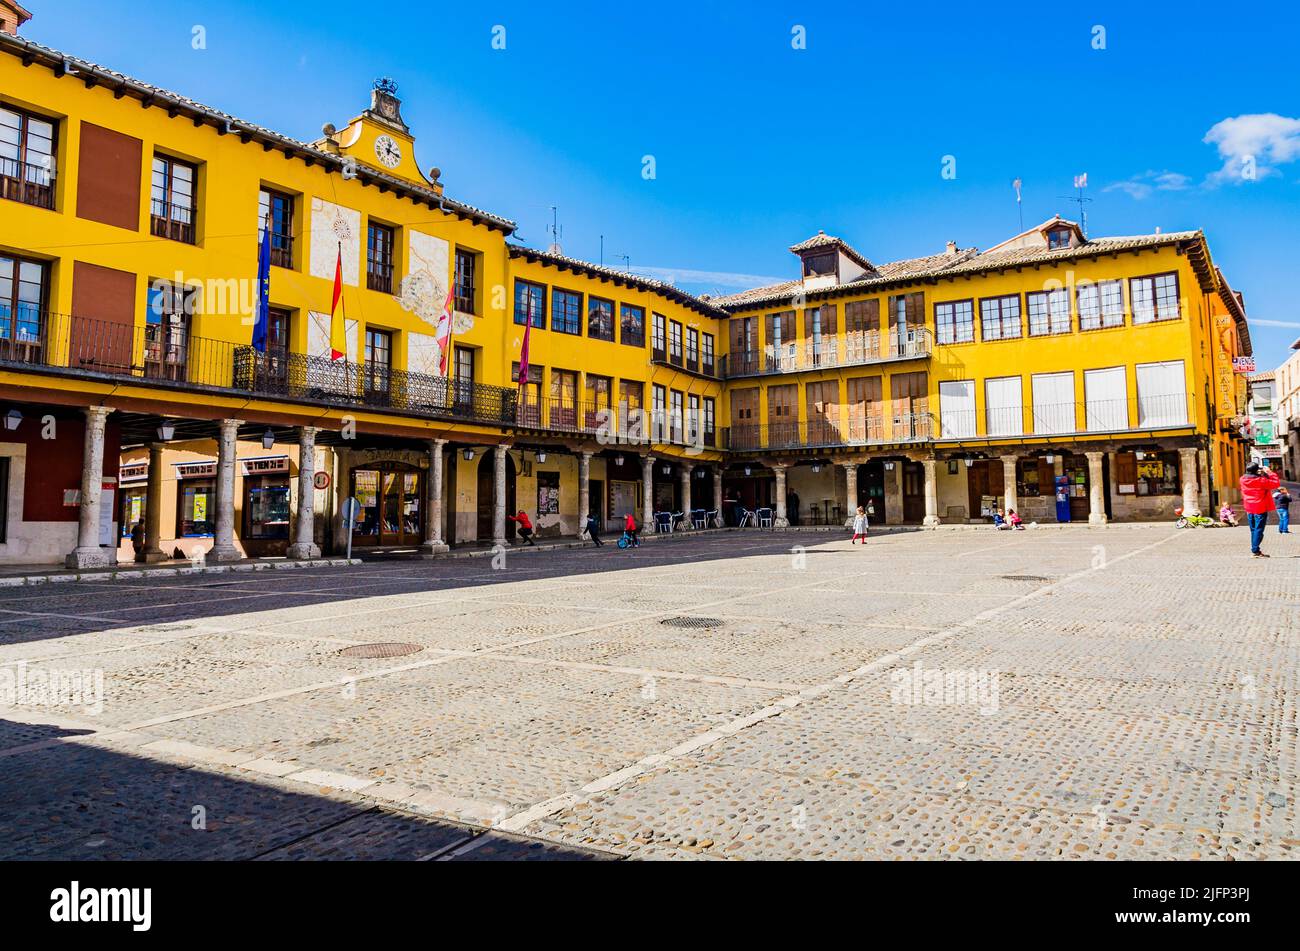 The Plaza Mayor, main square, is the historic central community space framed by the 17th century colonnade and porticos creating the arcade that encir Stock Photo